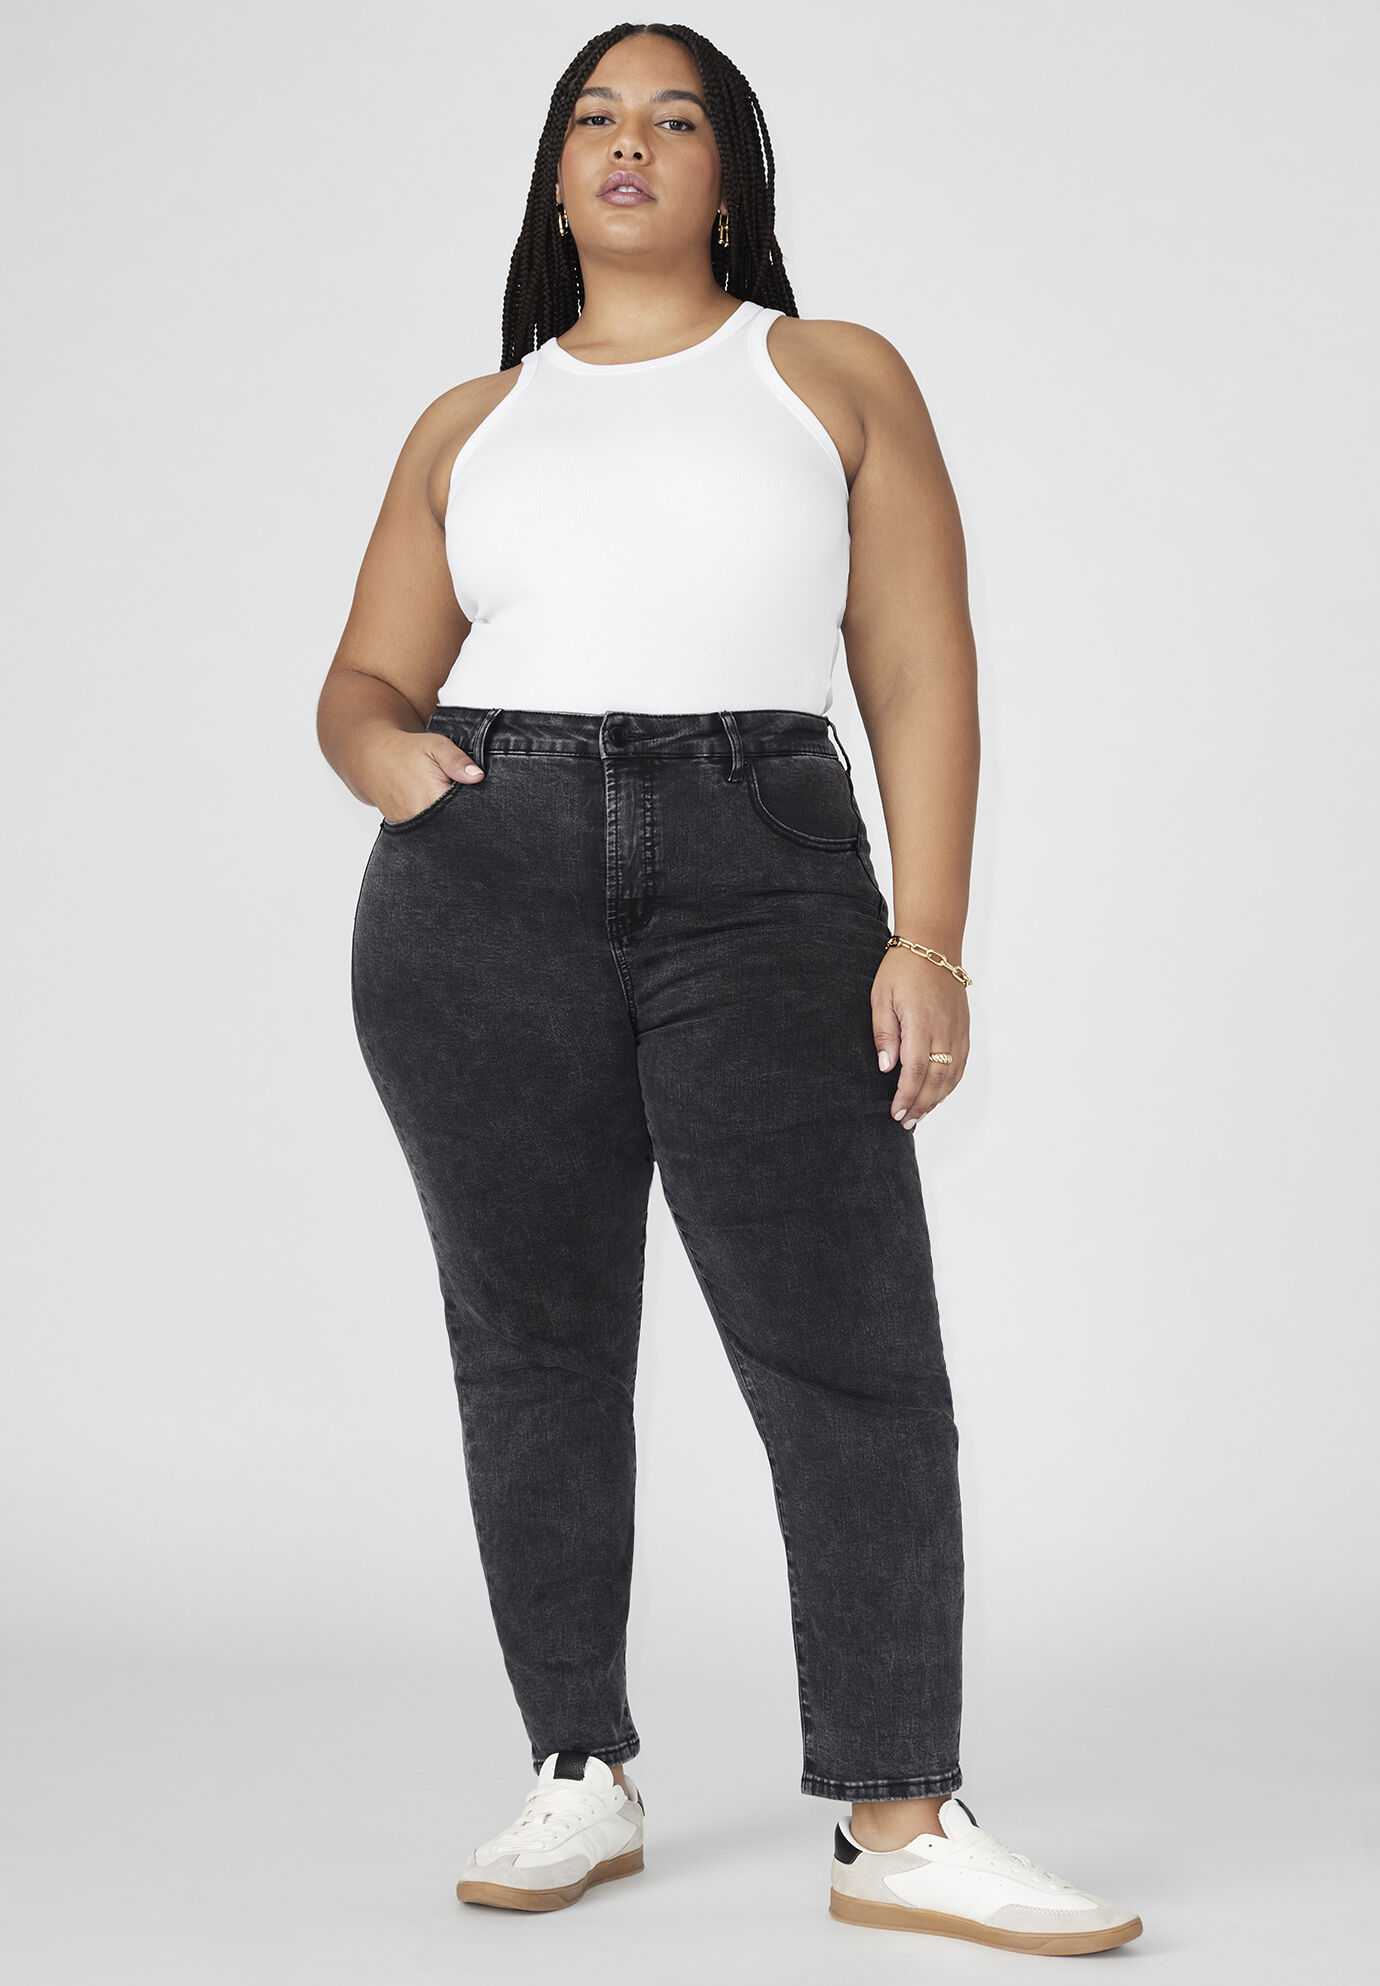 Plus Size Women The Leigh Super Stretch Slim Jean By ( Size 26 )